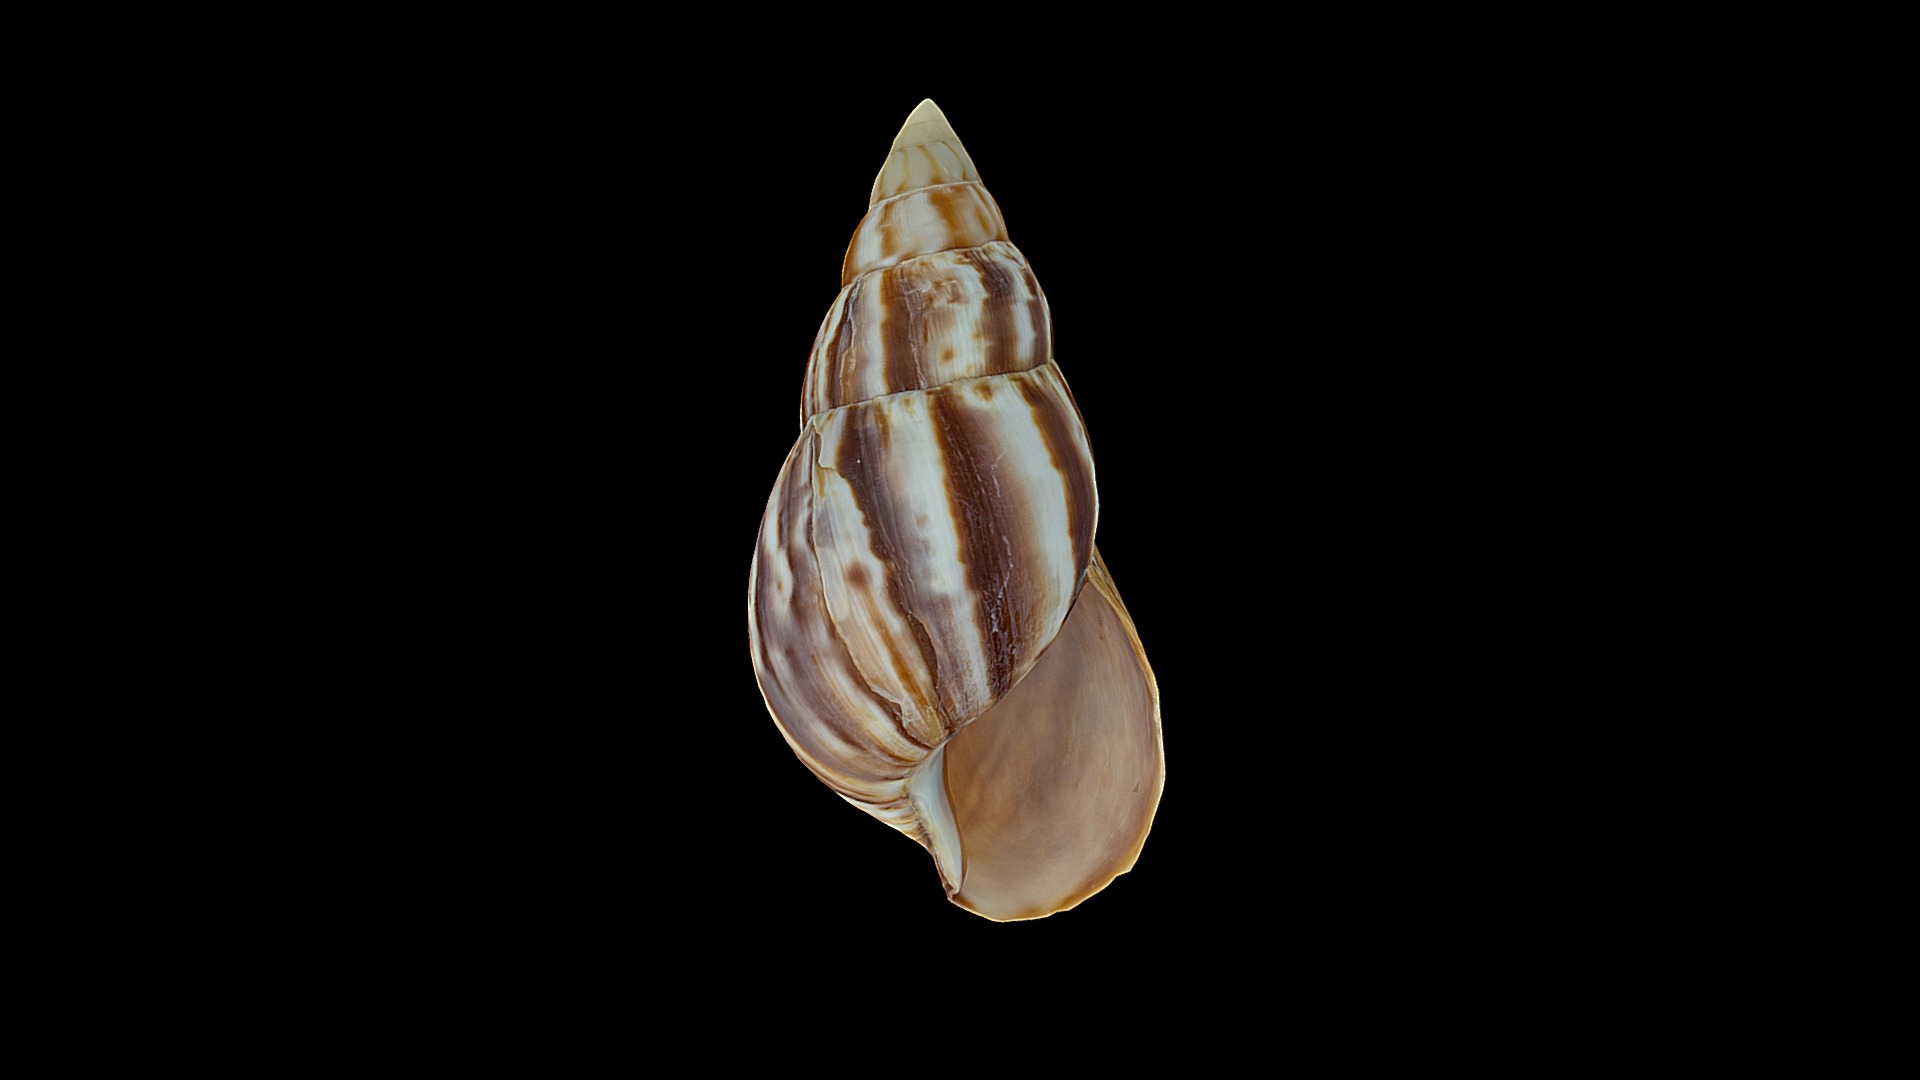 3D model Achatina - This is a 3D model of the Achatina. The 3D model is about a close-up of a sea shell.